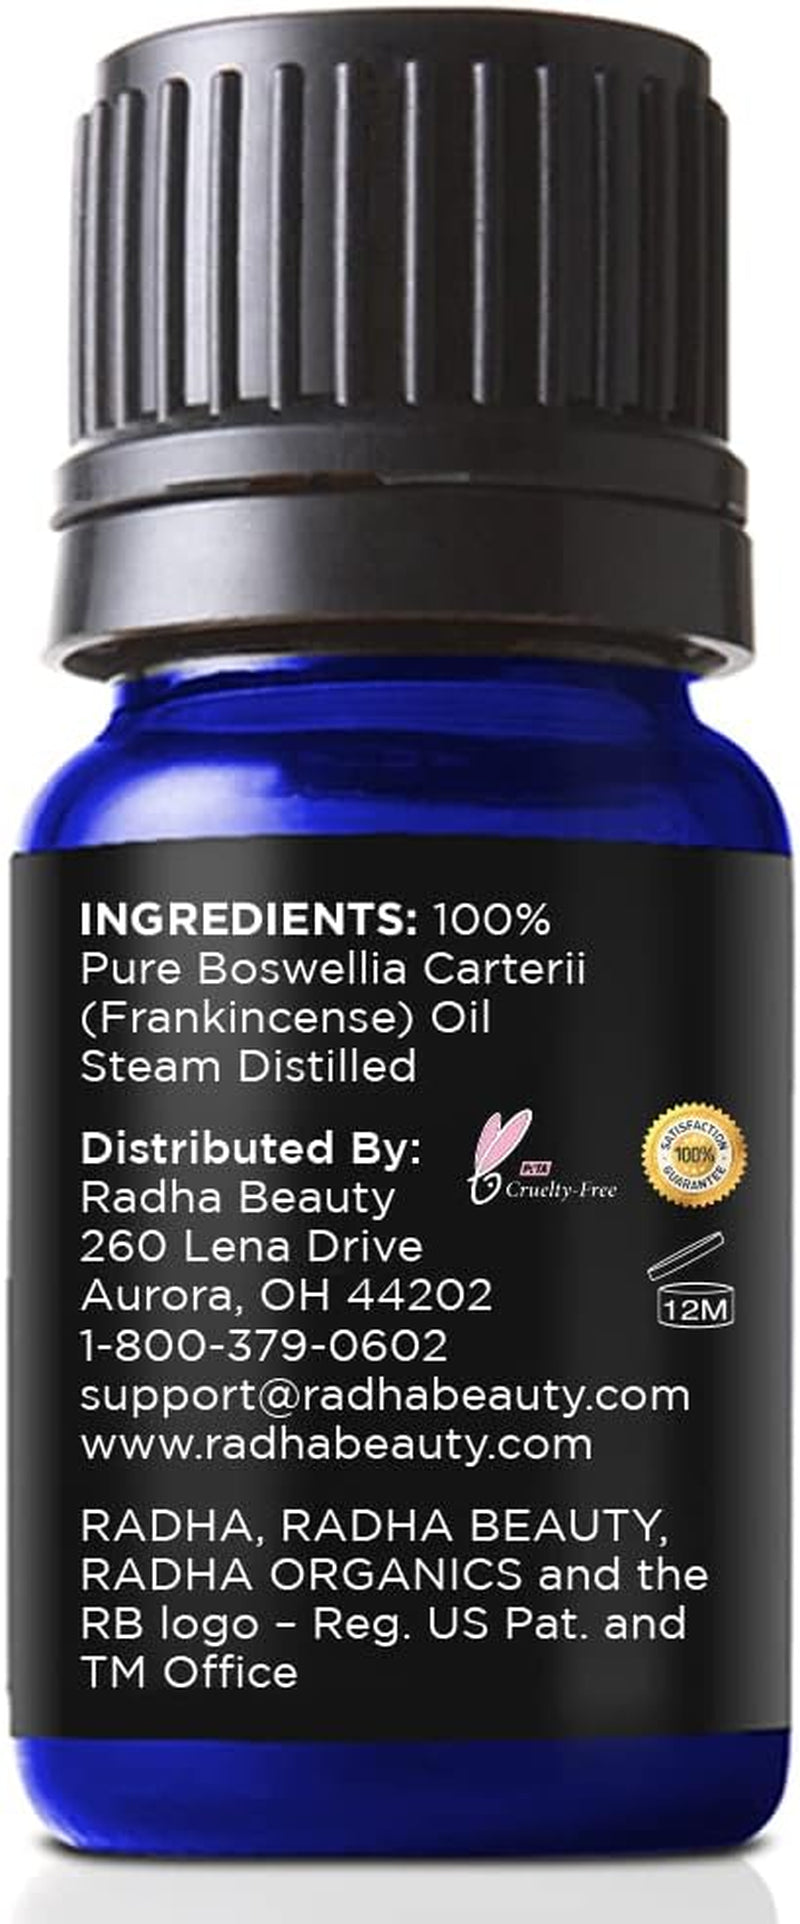 Frankincense Essential Oil 10Ml - 100% Pure & Therapeutic Grade, Steam Distilled for Aromatherapy, Relaxation, Supports Healthy Immune System & Nervous Function